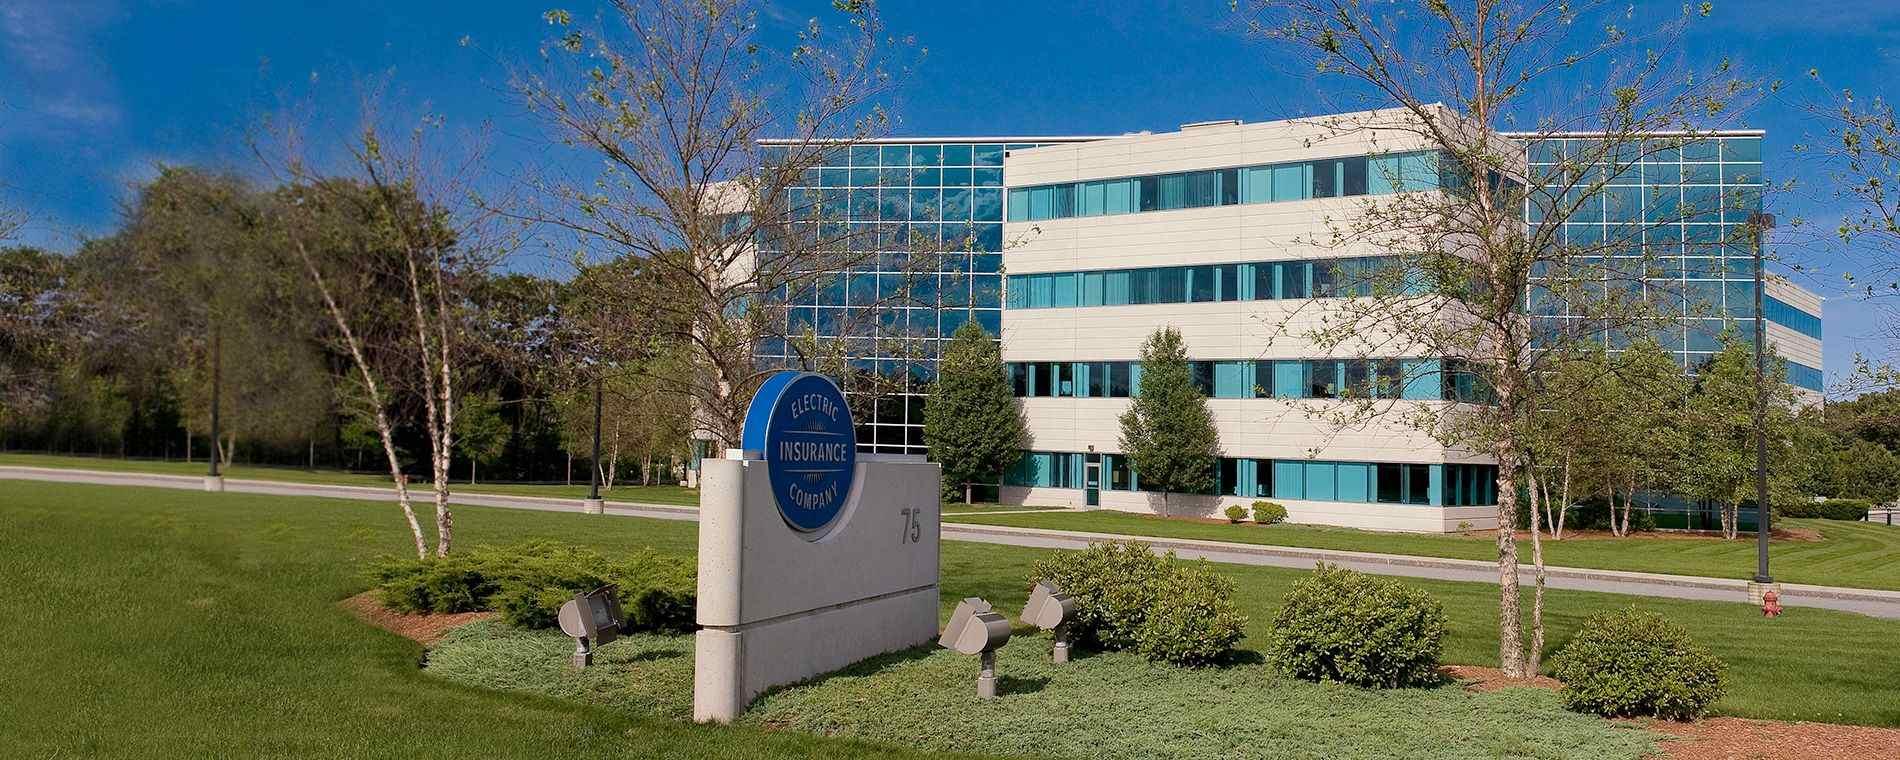 Photo of Electric Insurance Company's headquarters in Beverly, Massachusetts